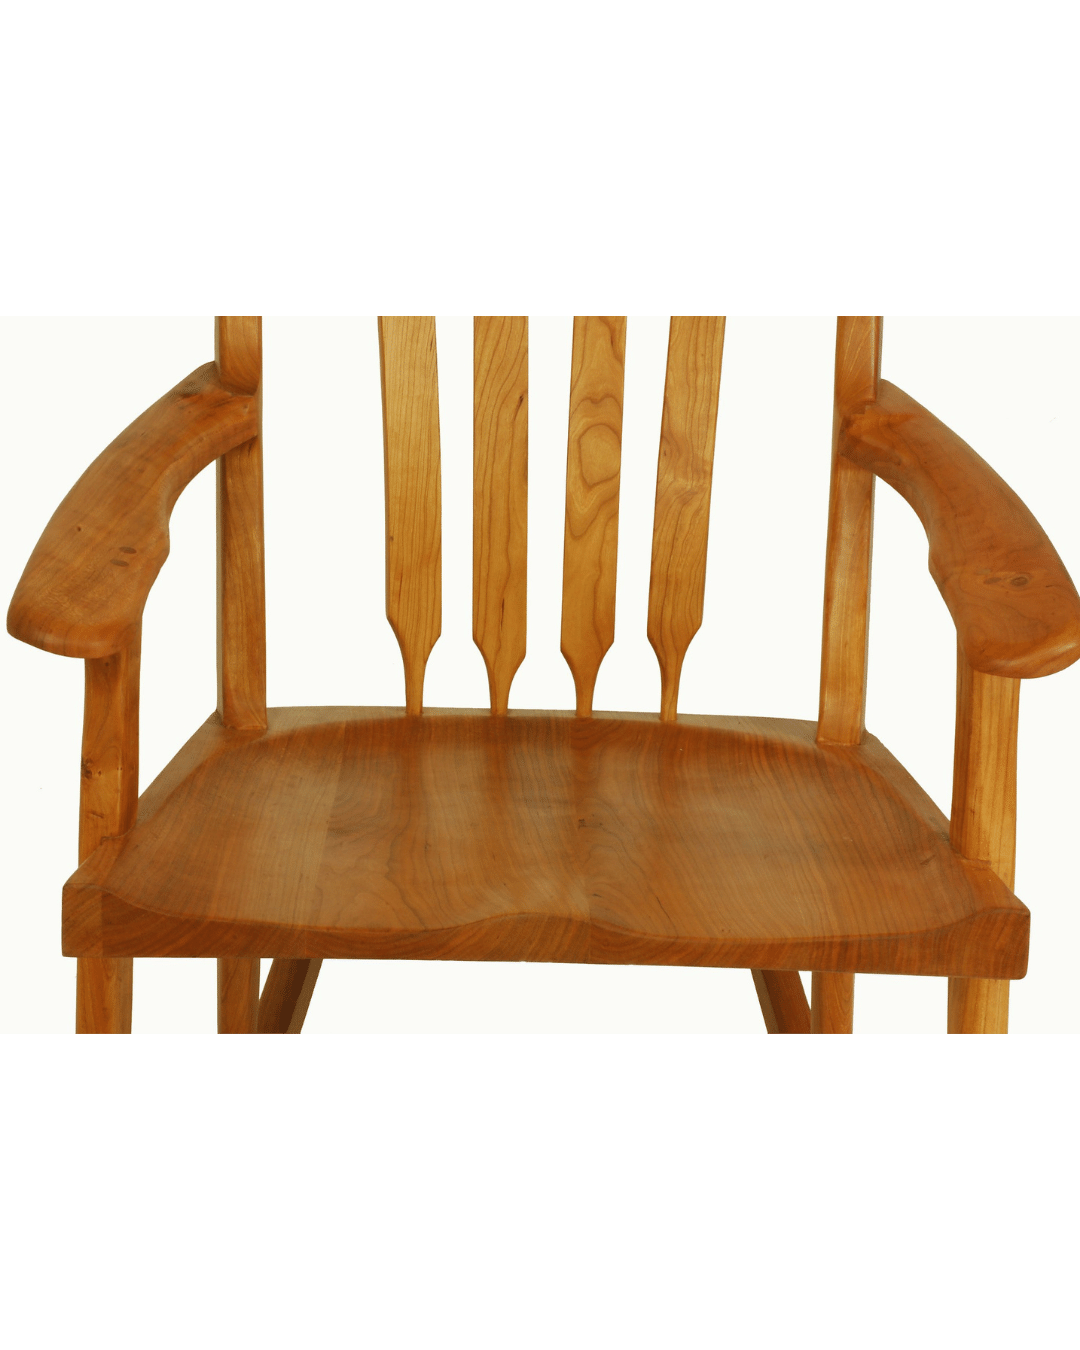 Sunrise Rocking Chair - Handcrafted Solid Wood Rocking Chair